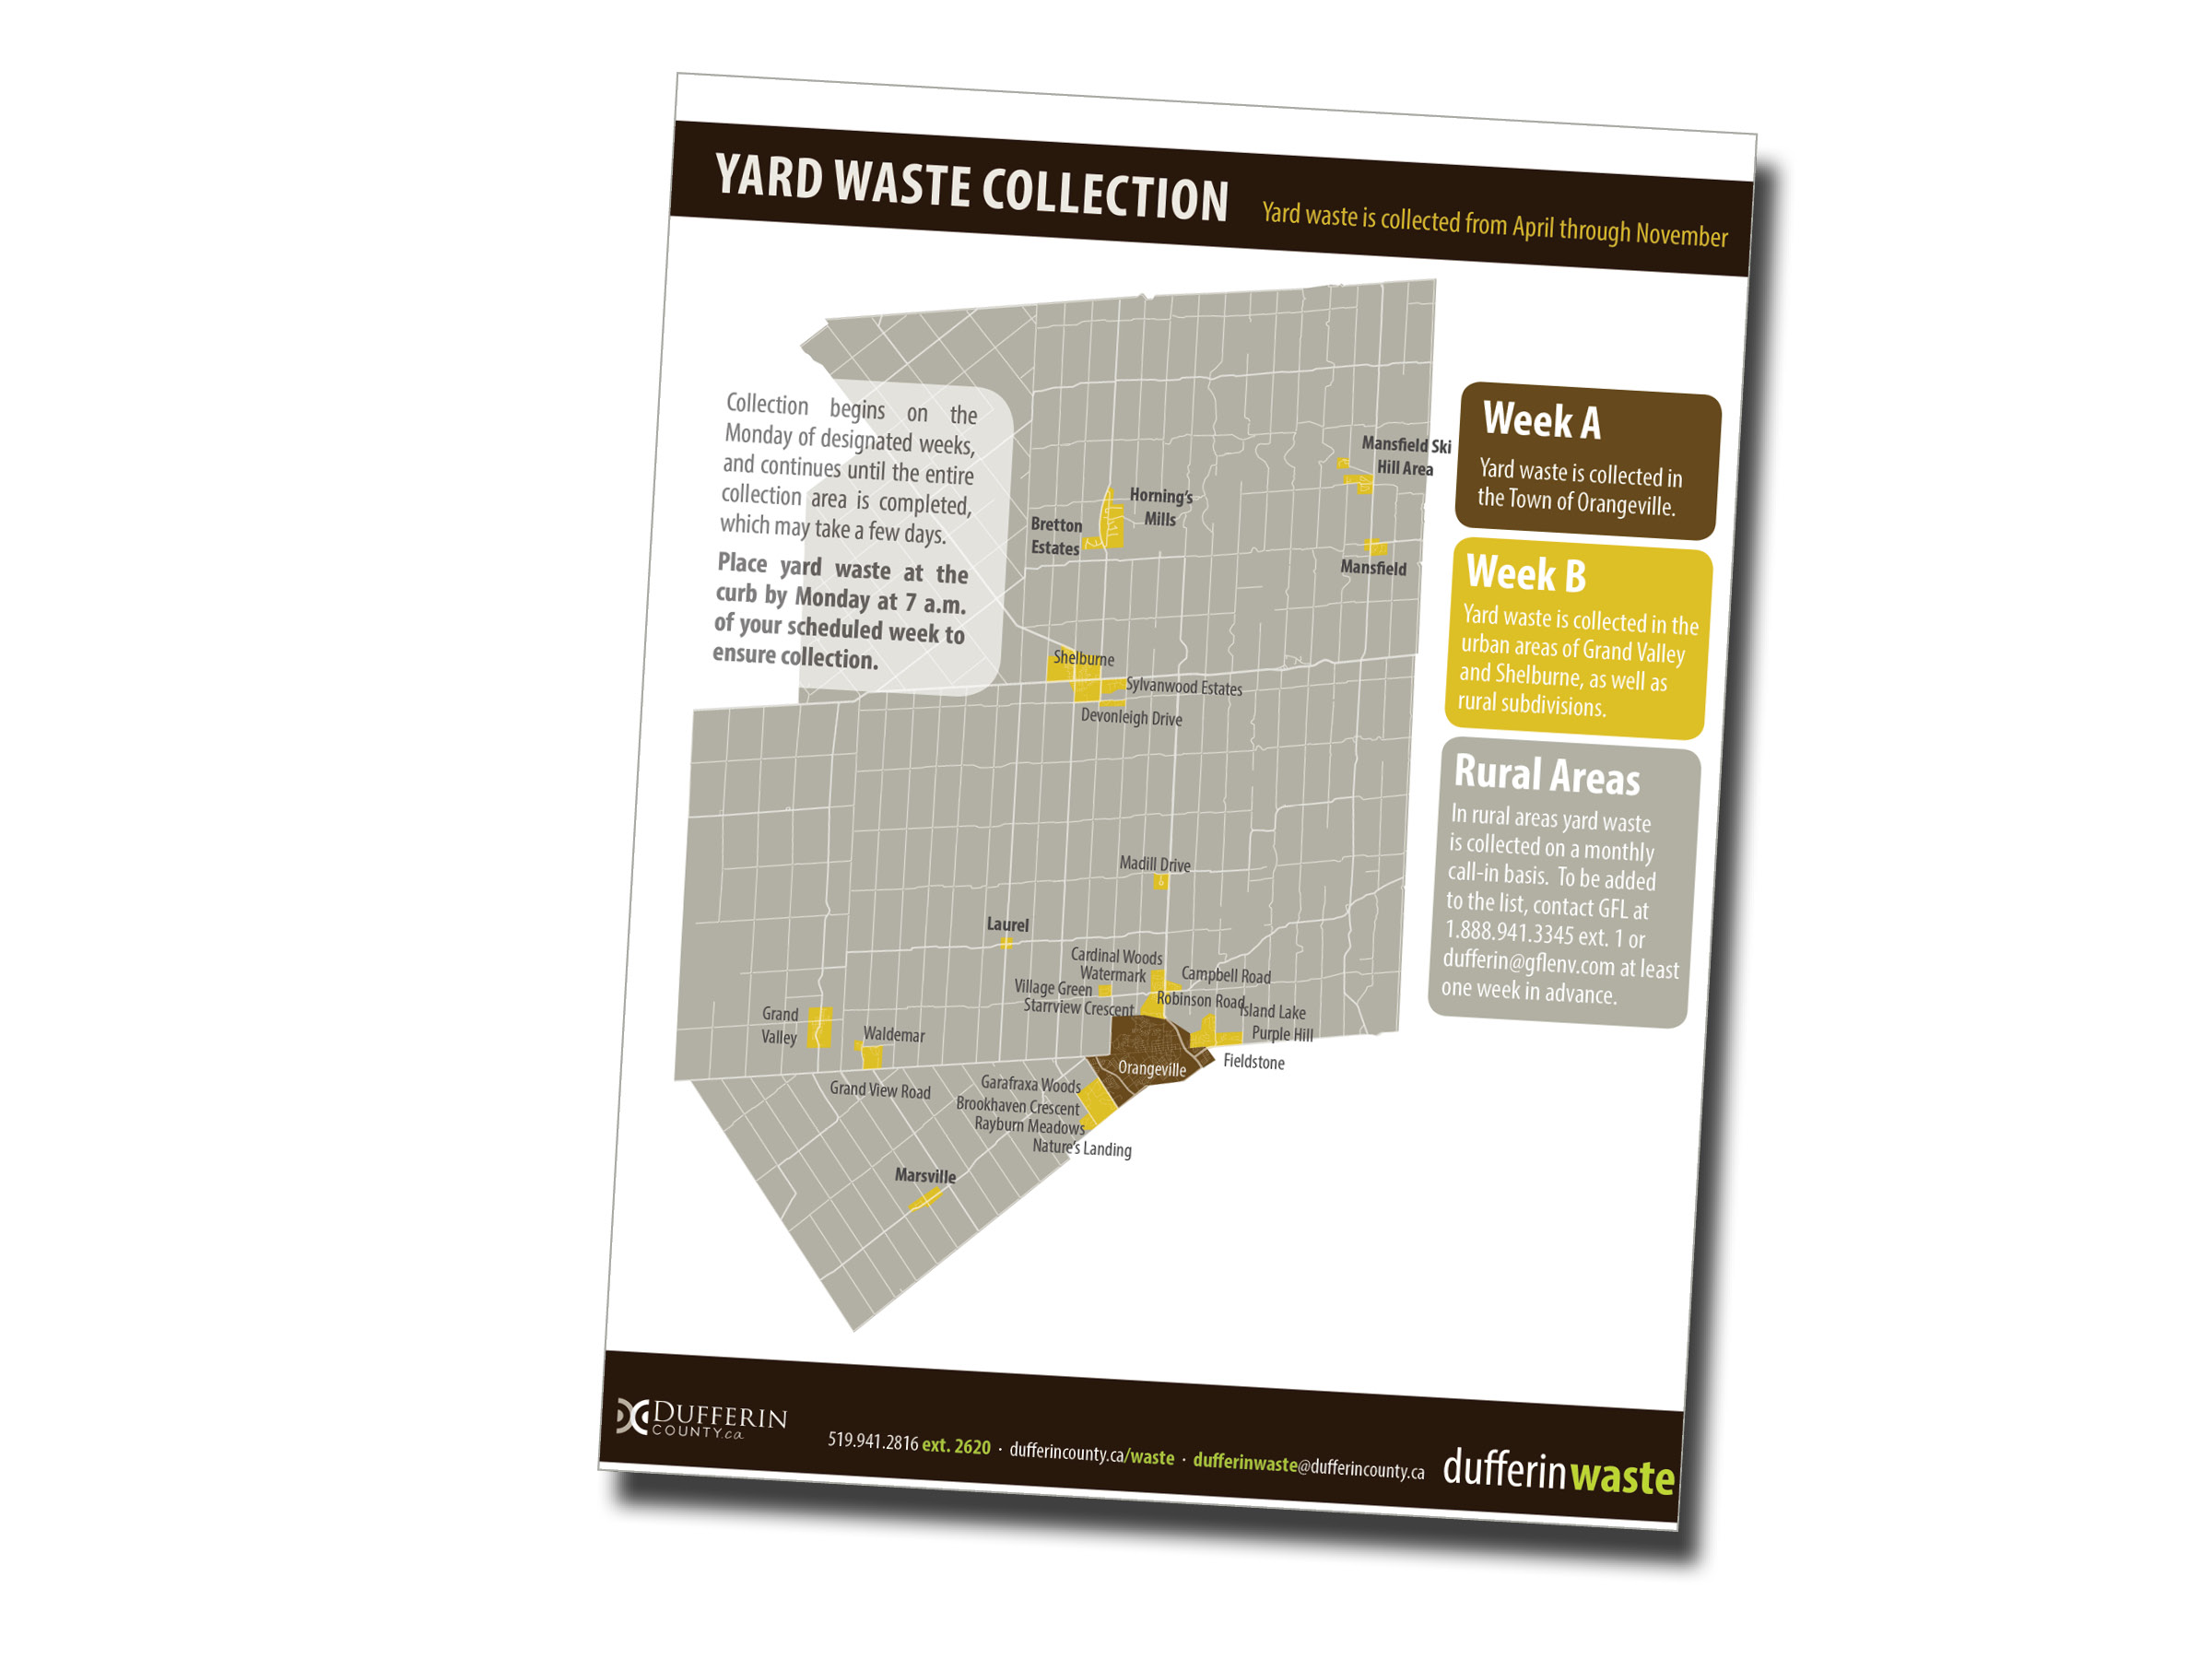 Map of Dufferin County showing yard waste collection zones